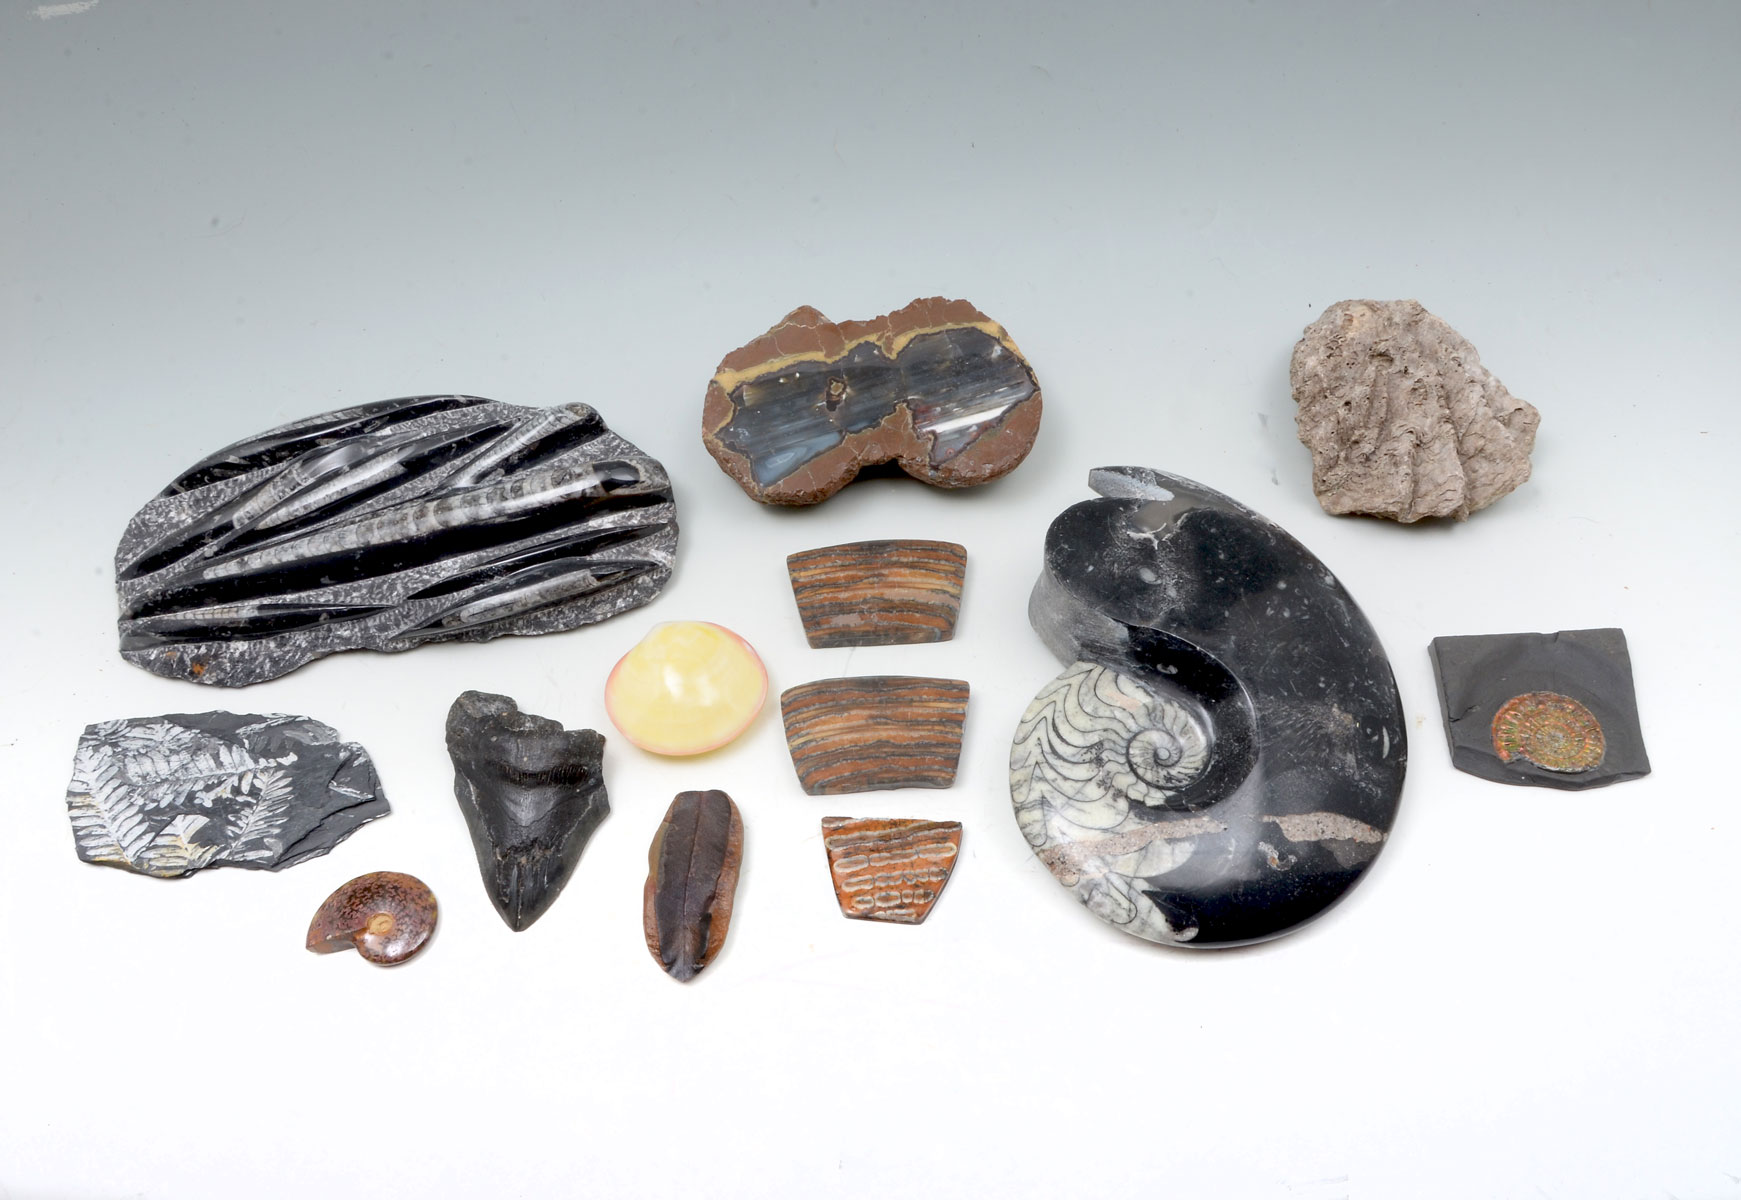 13 PIECE FOSSIL COLLECTION: Comprising